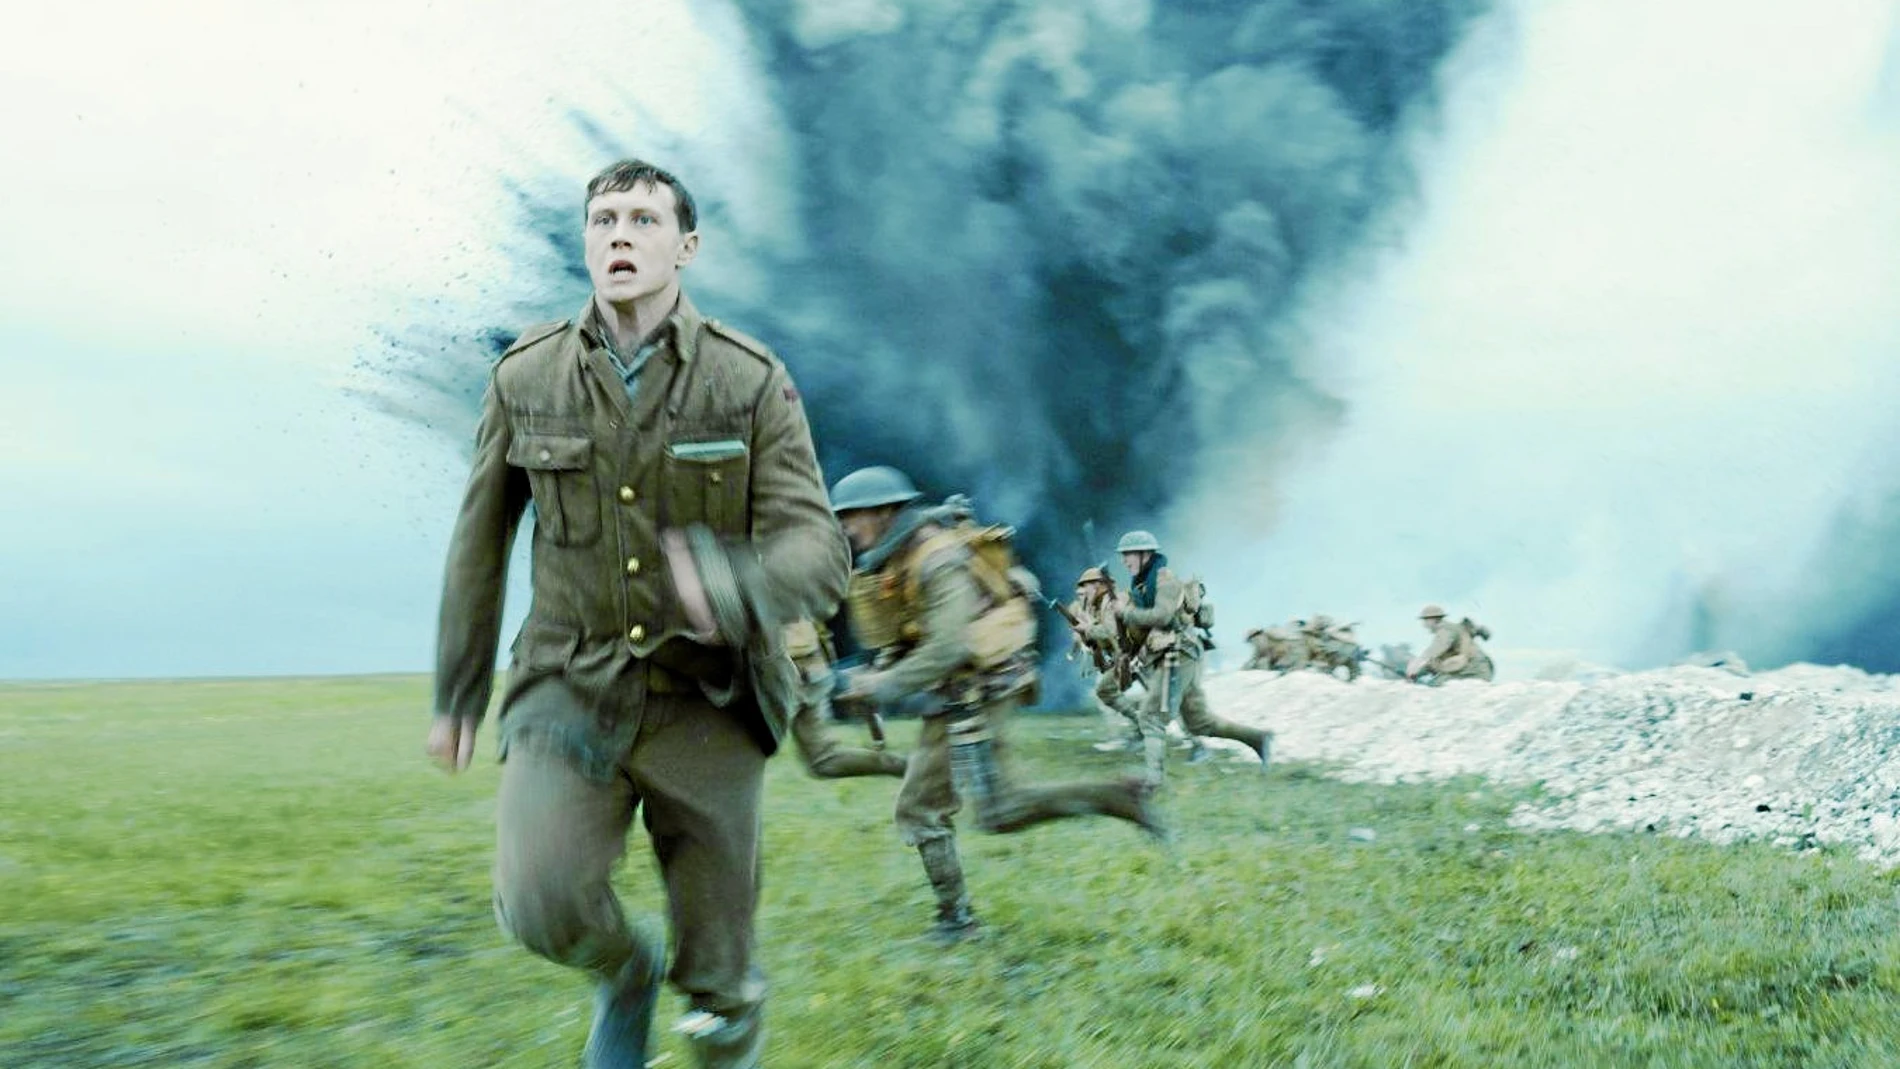 George MacKay as Schofield in 1917, the new epic from Oscar®-winning filmmaker Sam Mendes.